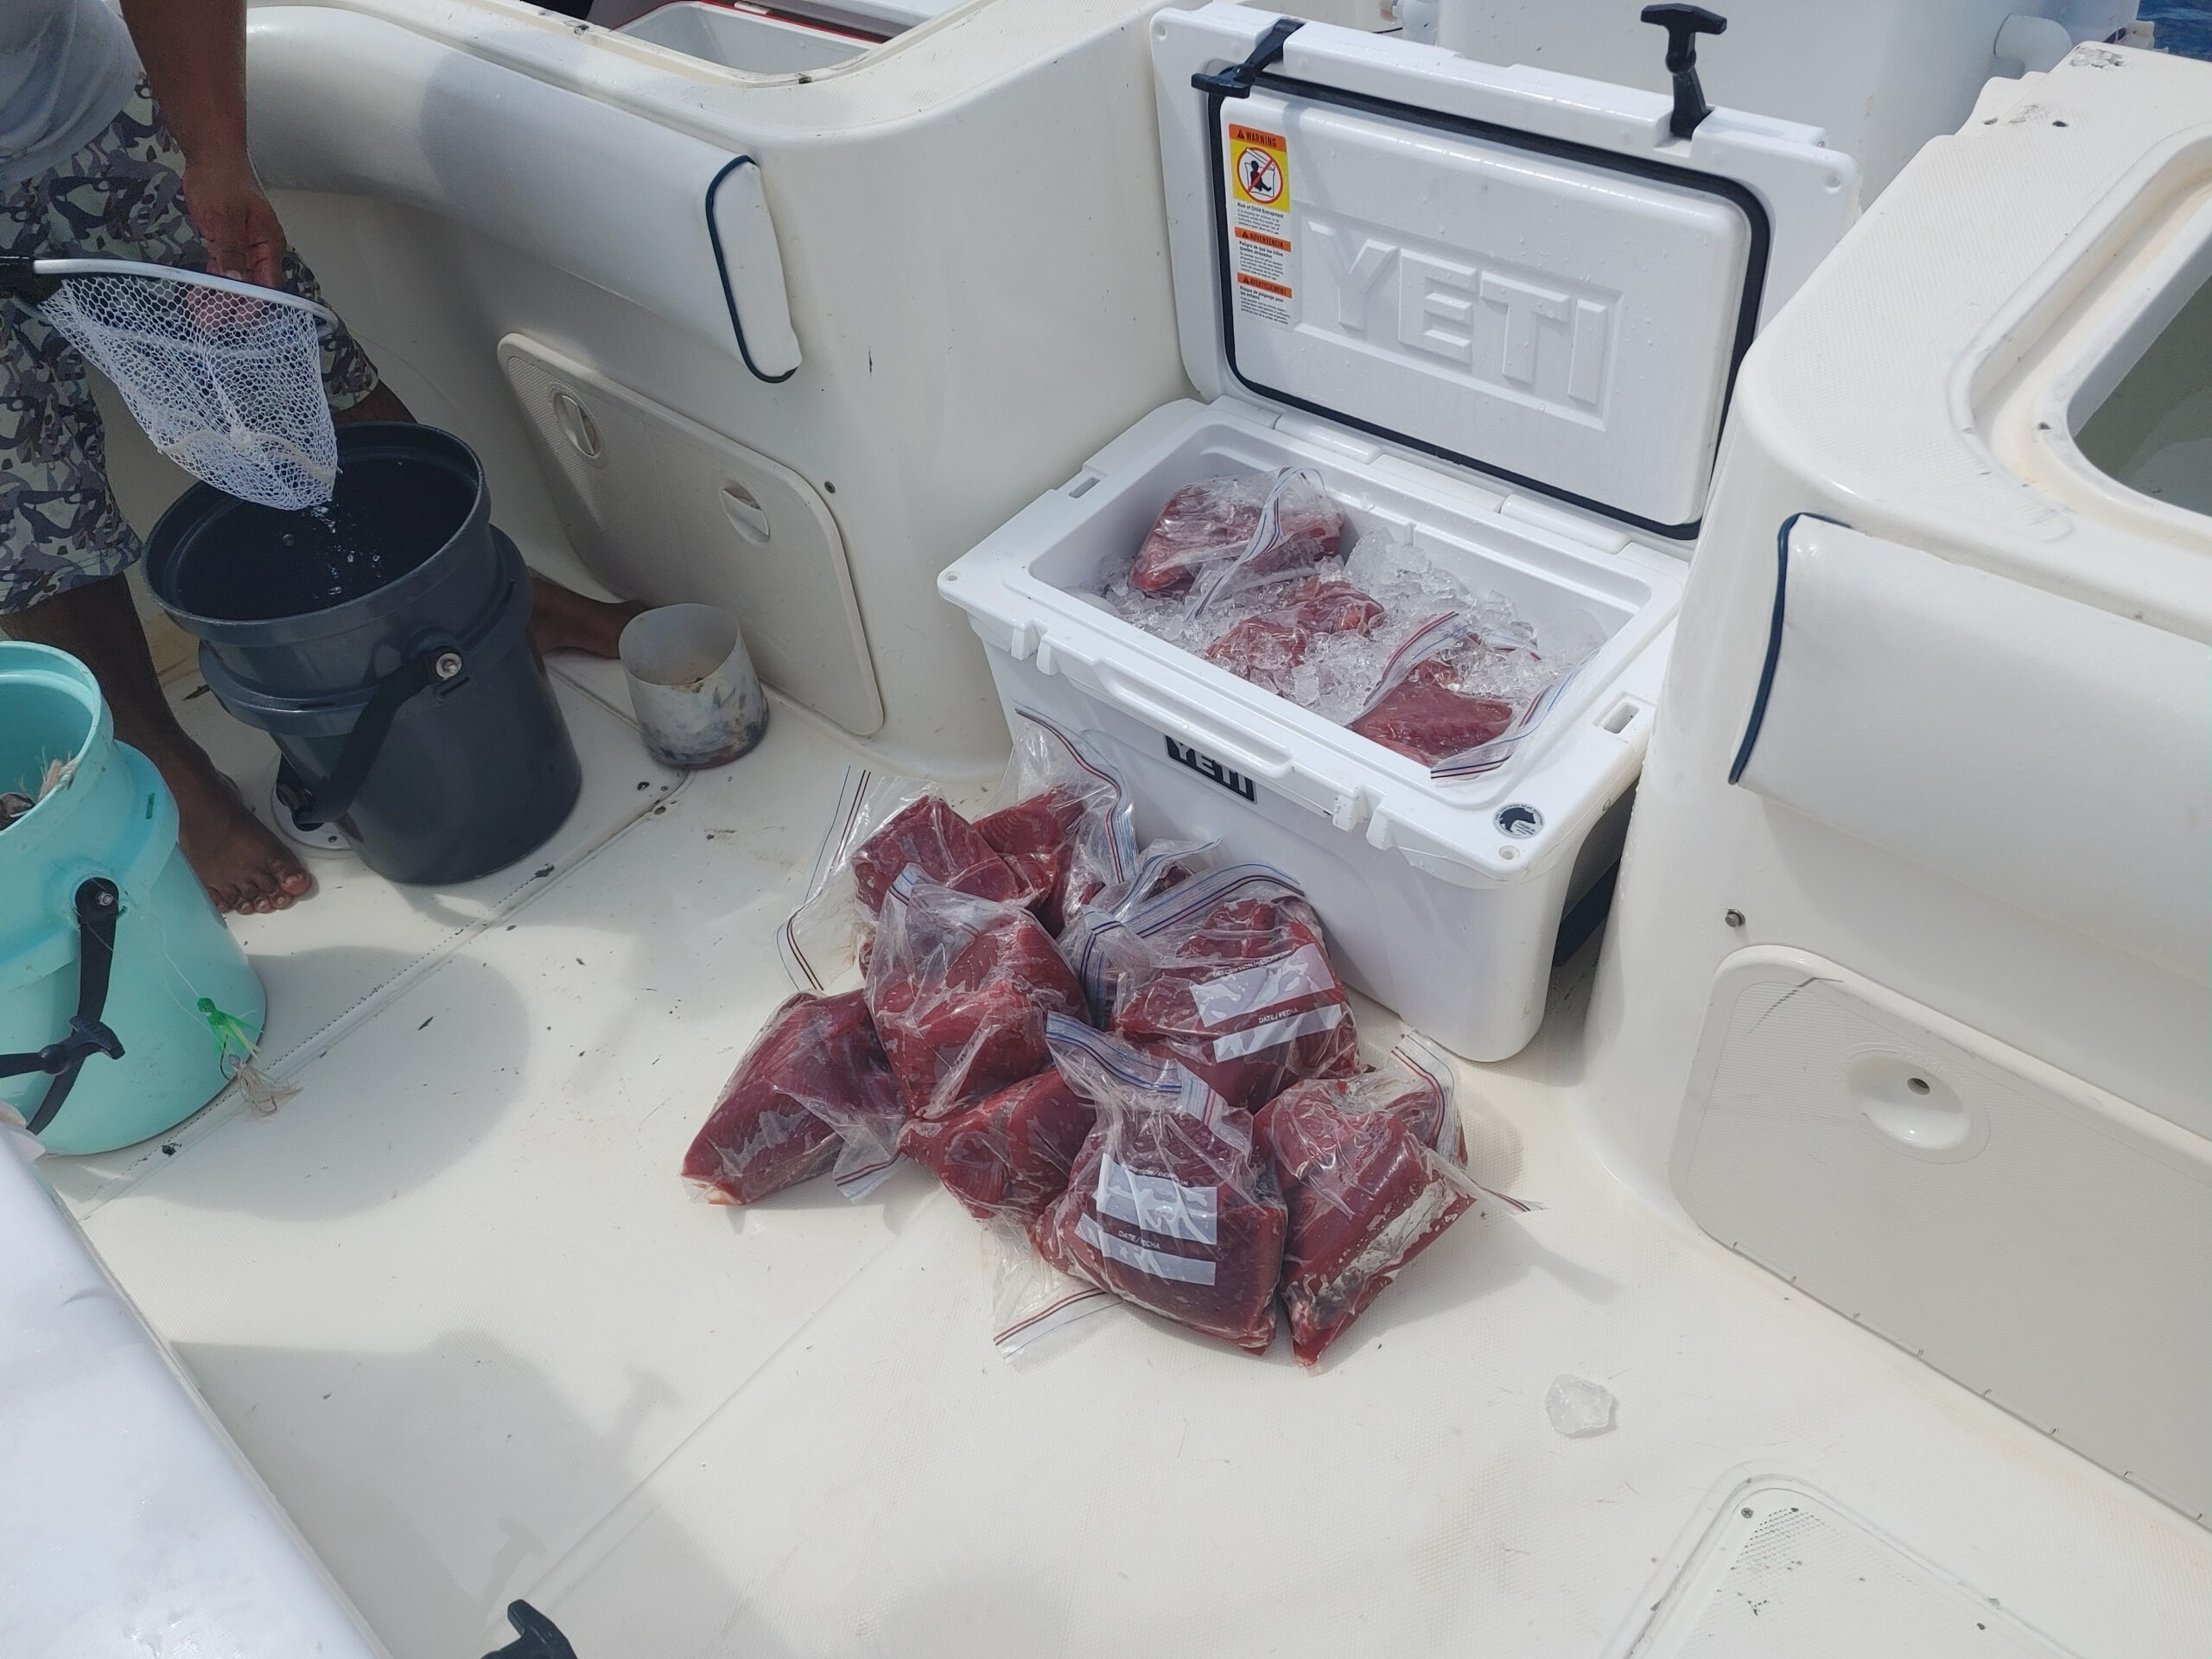 A Yeti Tundra boat cooler packed full of tuna meat.